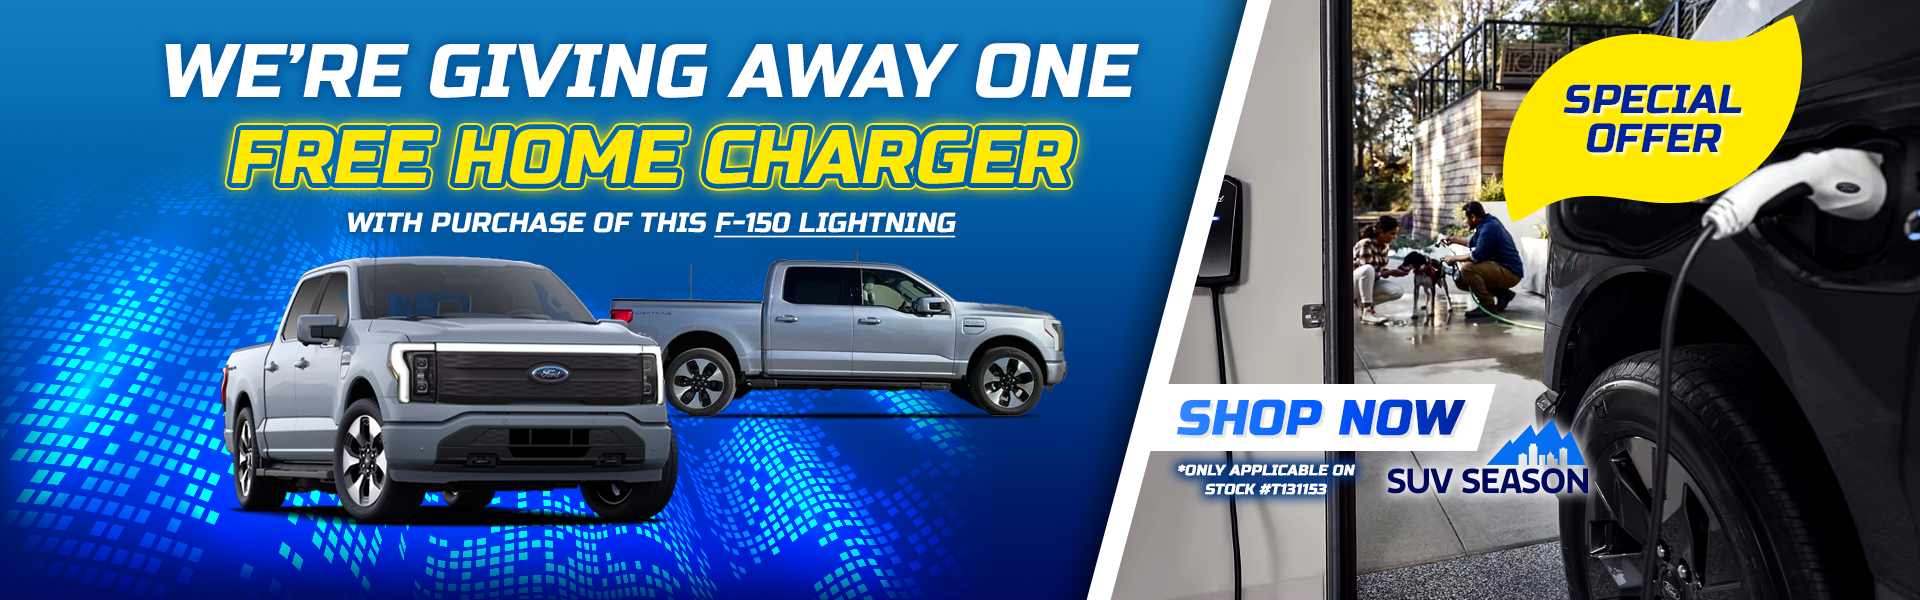 Free Home Charger at Kansas City Ford Dealer